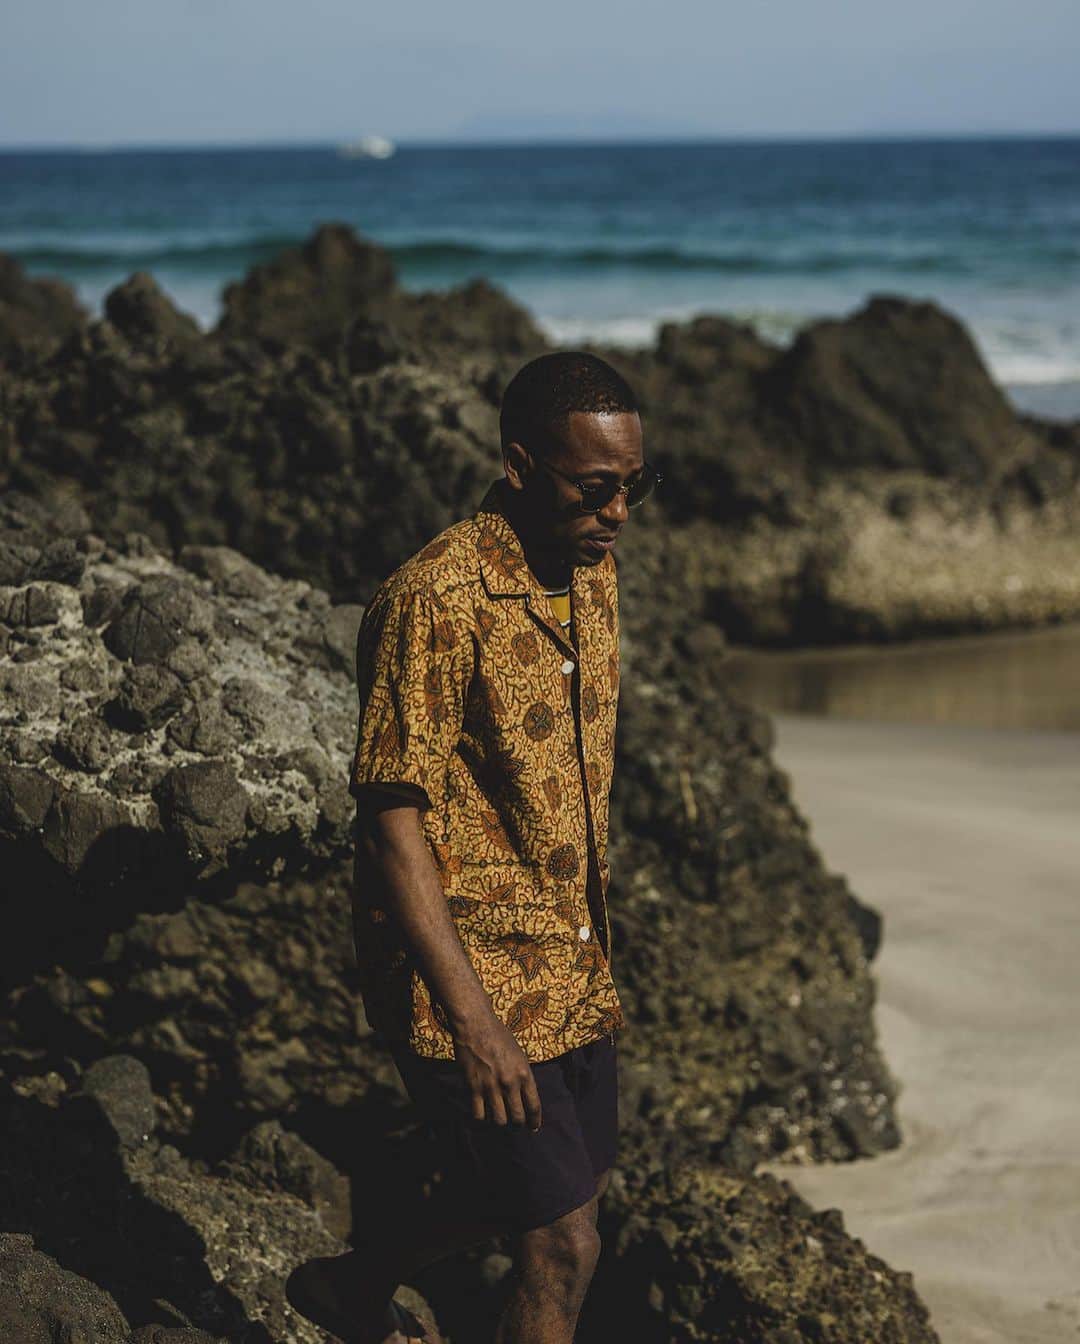 BEAMS+さんのインスタグラム写真 - (BEAMS+Instagram)「. Comfortable fit and sophisticated style, BEAMS PLUS classic beachwear. ---------- ●Beach Shirt Jacket Cotton Rayon Print Batik Print A modern take on the beach shirt that was popular in the 1960s. It features large buttons, an open collar, and patch pockets at the hem, eliminating the original design's pile lining to create a lightweight piece. The chest patch pocket is adjusted to fit vertically-oriented eyewear. Made from a lightweight and moisture-absorbent cotton-rayon blend, perfect for hot and humid summer days.  ●MIL Athletic Shorts Mini Ripstop A military-inspired BEAMS PLUS athletic shorts. Additional pocket details were added to consider town use, including side and back pockets. The relaxed fit pattern with a wide thigh width is designed for comfort. The material is made from a highly durable mini ripstop fabric using a very fine 20-denier nylon, providing lightweight and high stretchability. The mesh lining ensures comfort during hot and humid seasons.  ●Pocket Tee Wide Stripe A classic-colored wide stripe pocket t-shirt. Made from thick uneven yarn knitted in a jersey stitch to achieve a classic fabric texture. The fabric is soft and has a pleasant touch, completed at a sewing factory in Japan.  快適な着心地と洗練されたスタイル、BEAMS PLUSのクラシックなビーチウェア。 ---------- ●Beach Shirt Jacket Cotton Rayon Print Batik Print 1960年代に流行したビーチシャツを現代的ににアレンジ。大きめのボタンやオープンカラー、裾に付くパッチポケットのディテールが特徴で、オリジナルデザインに付いていたパイル地のライニングを省き、軽い一枚で仕上げています。胸のパッチポケットはアイウェアが収まる縦長のサイズにアレンジ。 素材レーヨンコットンの軽く吸湿性の良い素材を使用。温度と湿度の高い夏場で大活躍。  ●MIL Athletic Shorts Mini Ripstop ミリタリーモチーフの〈BEAMS PLUS〉アスレチックショーツ。オリジナルデザインには無いポケットディテールを追加。をタウンユースでの着用を考慮、サイドポケットとバックポケットを加えています。広いワタリ幅を持たせたリラックス感のあるパターンを使用。 素材使いは、非常に細い20デニールナイロンを使用した引き裂き強度の高いミニリップストップ生地を使用。軽量性・高いストレッチ性を併せ持つ素材。裏地にはメッシュ素材を使用し、気温と湿度が高いシーズンを快適に過ごすことが可能です。  ● Pocket Tee Wide Stripe クラシックな配色とワイドピッチのストライプポケットTシャツ。 太番手のムラ糸を天竺編みし、クラシックな生地感を表現。日本国内の縫製工場で仕上げたソフトでふくらみのある肌触りの良い生地です。 . @beams_plus @beams_plus_harajuku @beams_plus_yurakucho #beamsplus」7月27日 20時00分 - beams_plus_harajuku